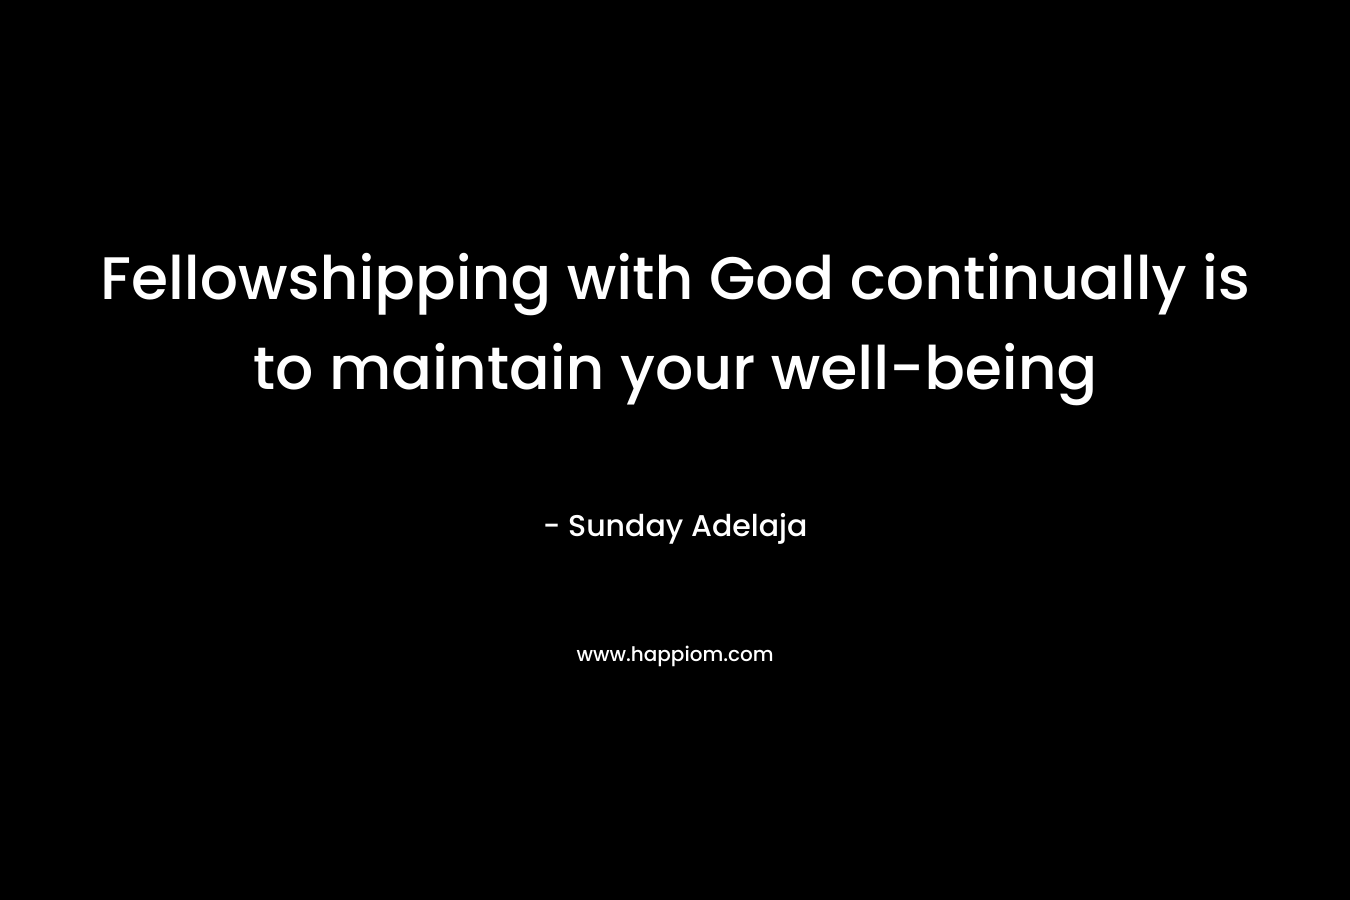 Fellowshipping with God continually is to maintain your well-being